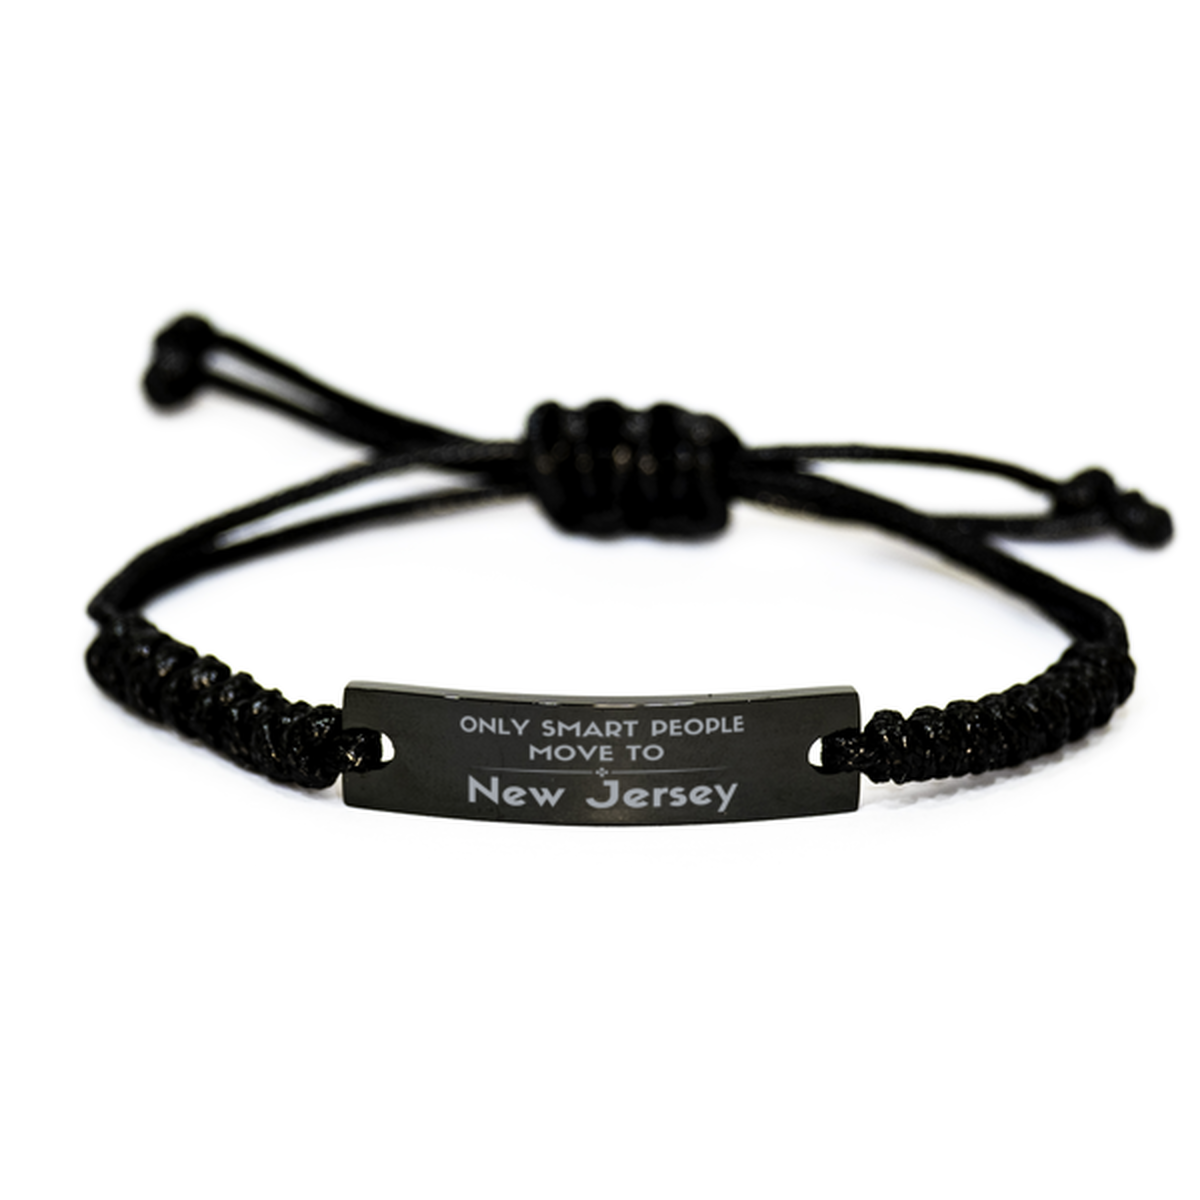 Only smart people move to New Jersey Black Rope Bracelet, Gag Gifts For New Jersey, Move to New Jersey Gifts for Friends Coworker Funny Saying Quote